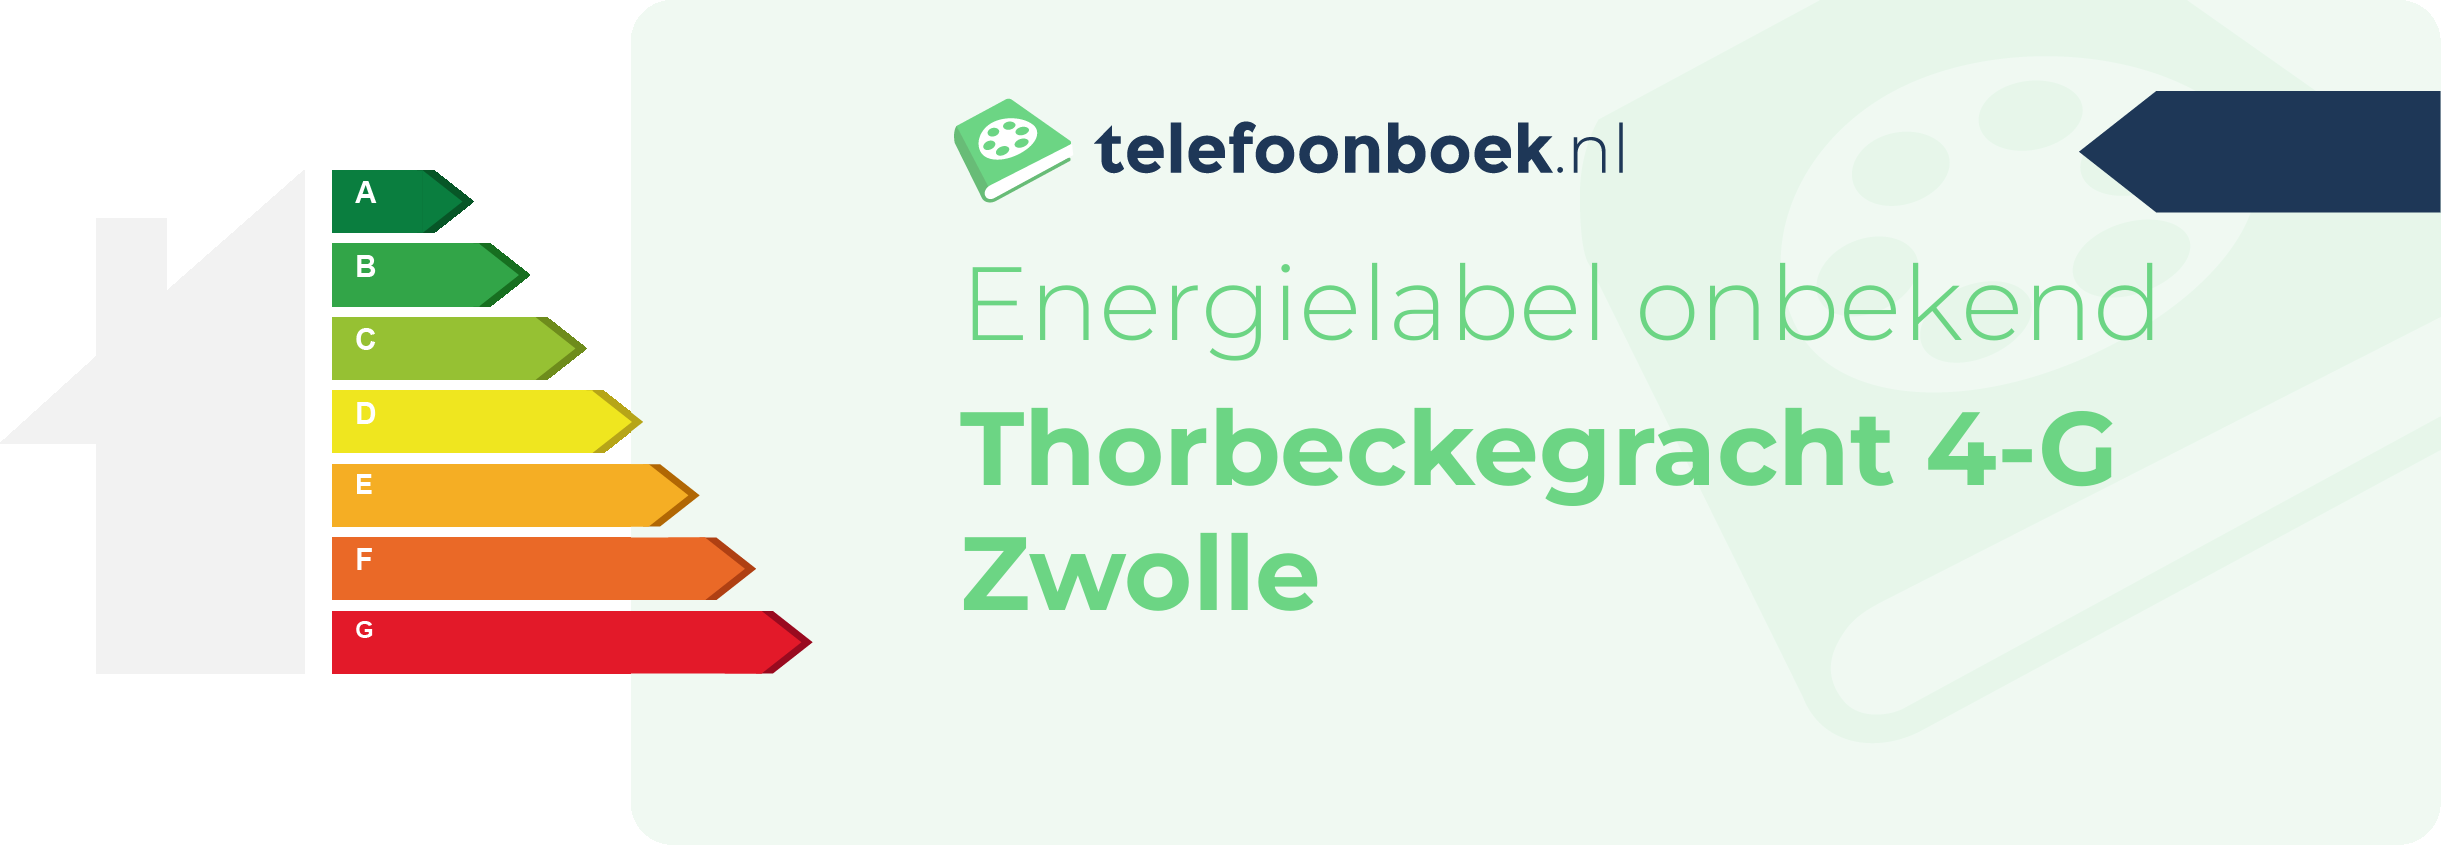 Energielabel Thorbeckegracht 4-G Zwolle